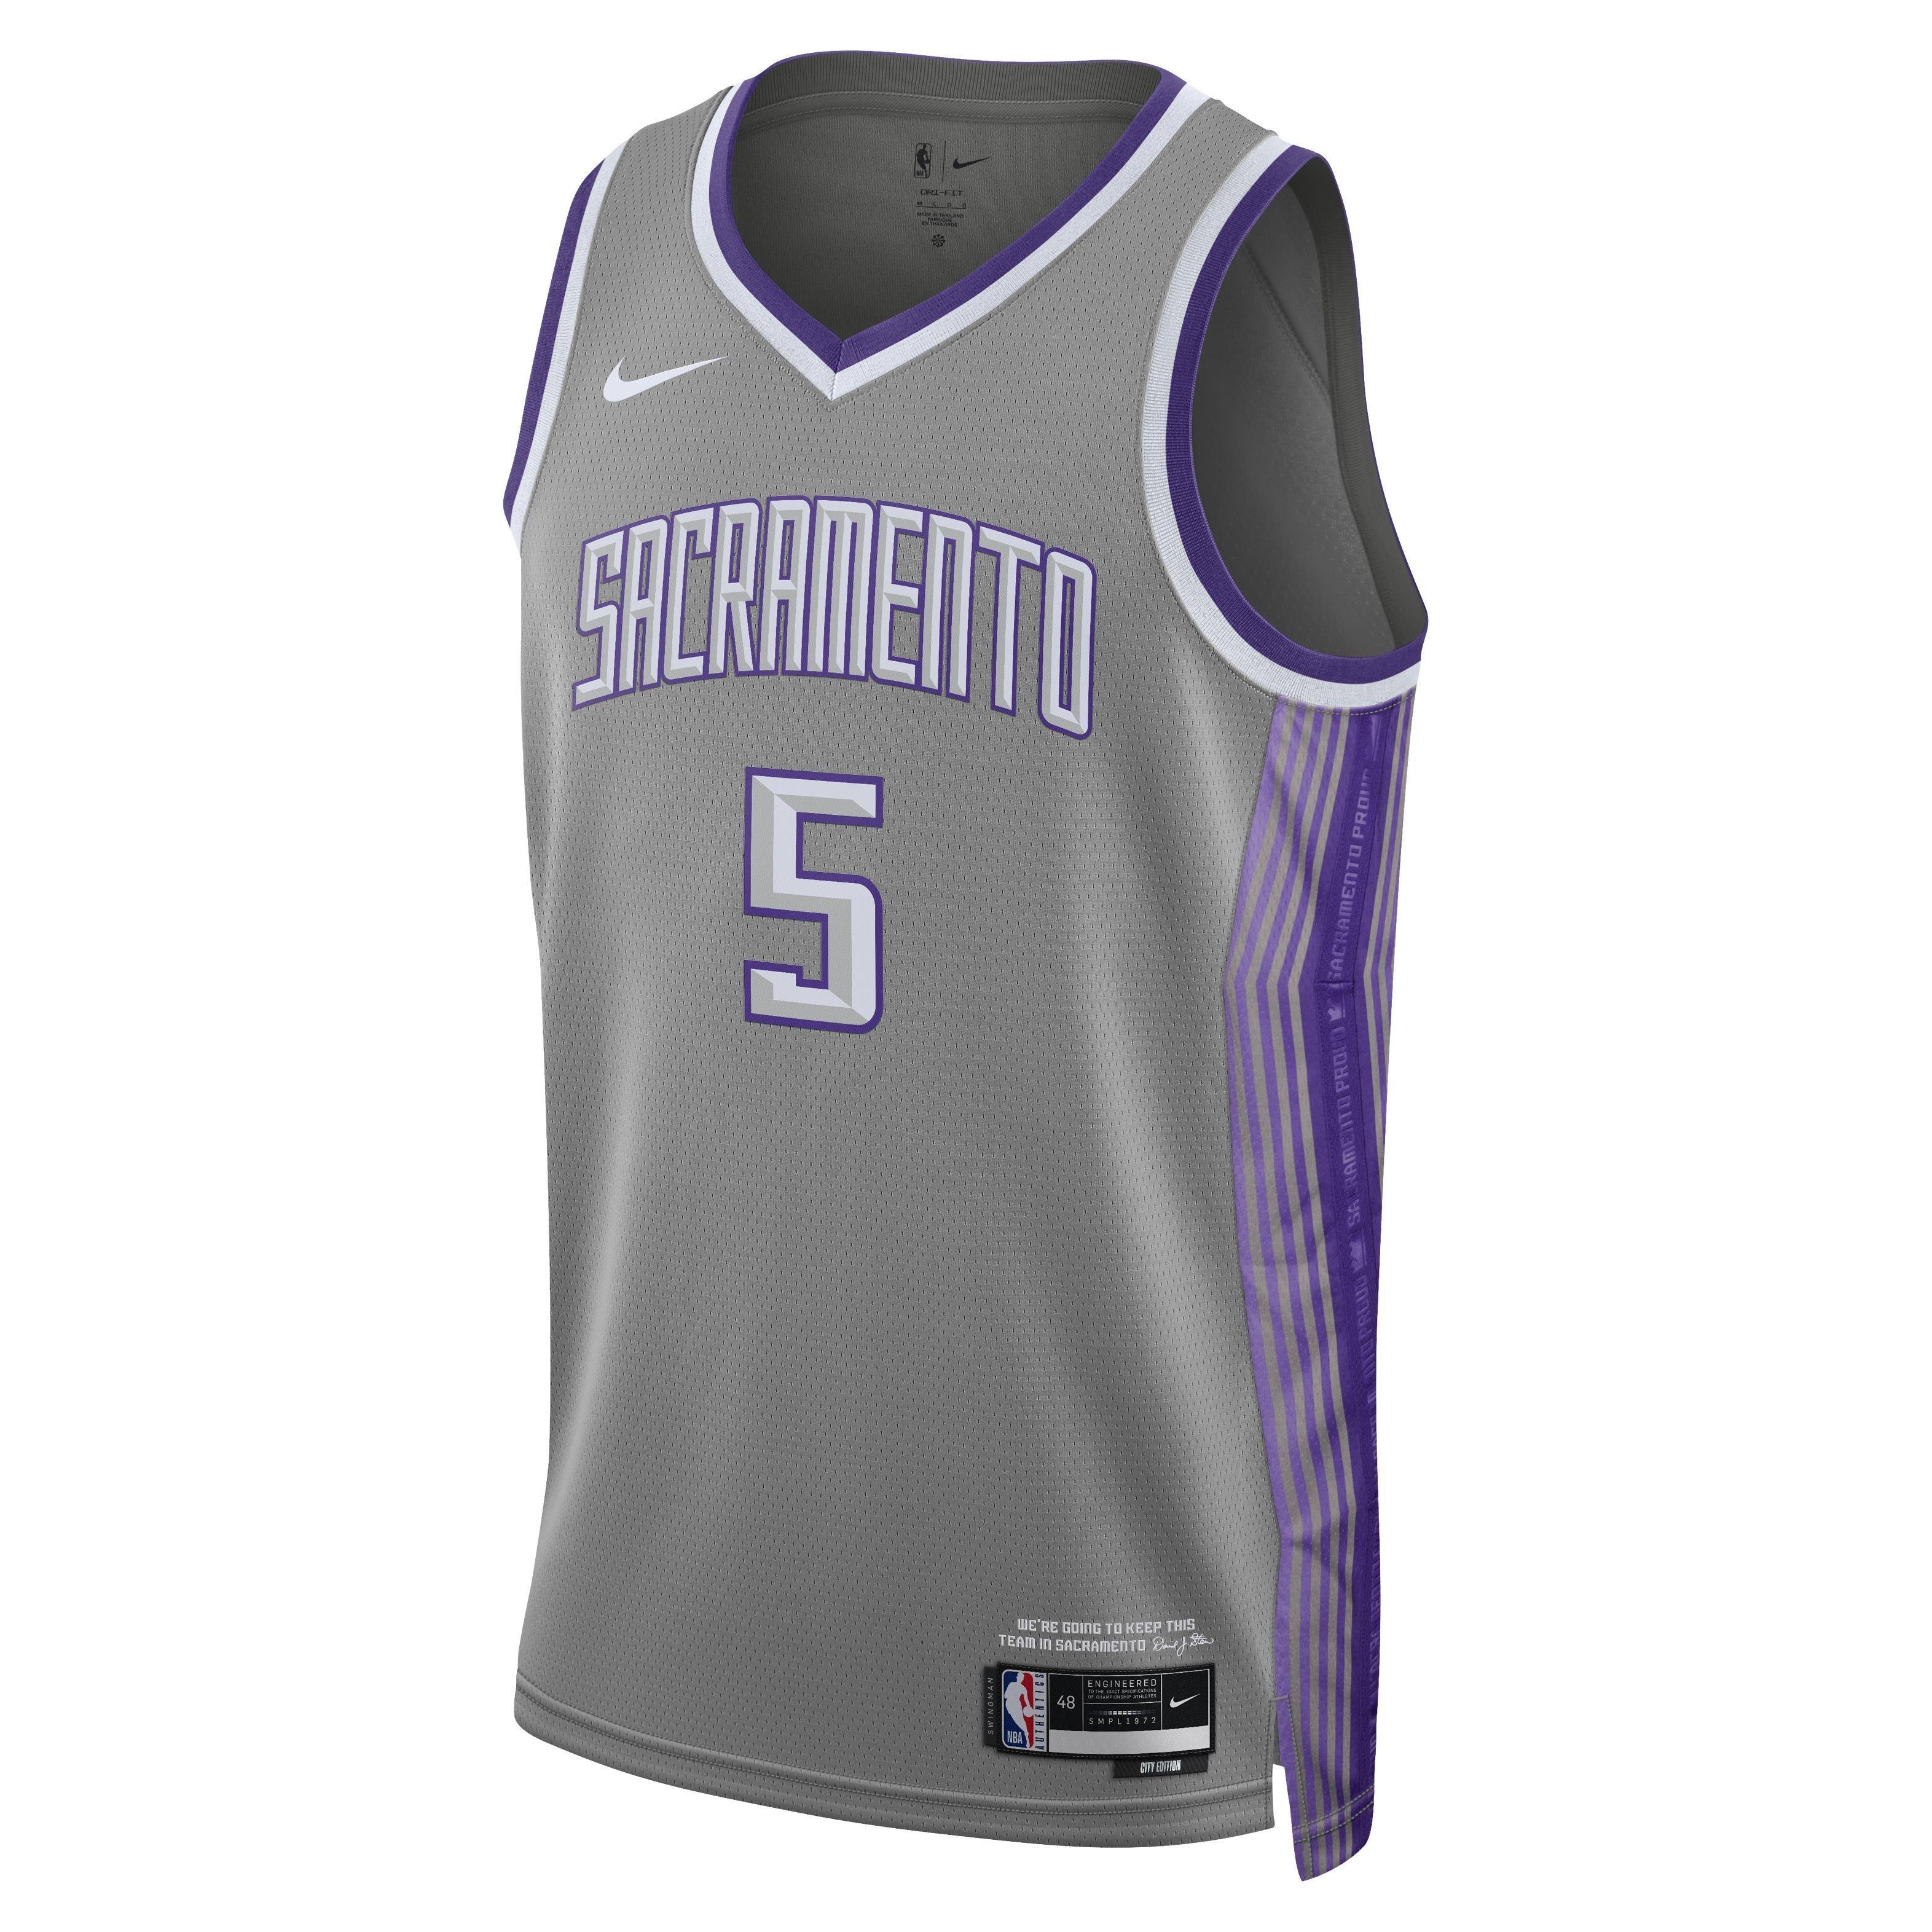 Sacramento Kings Updated Nike City Edition Uniform Introduces Red